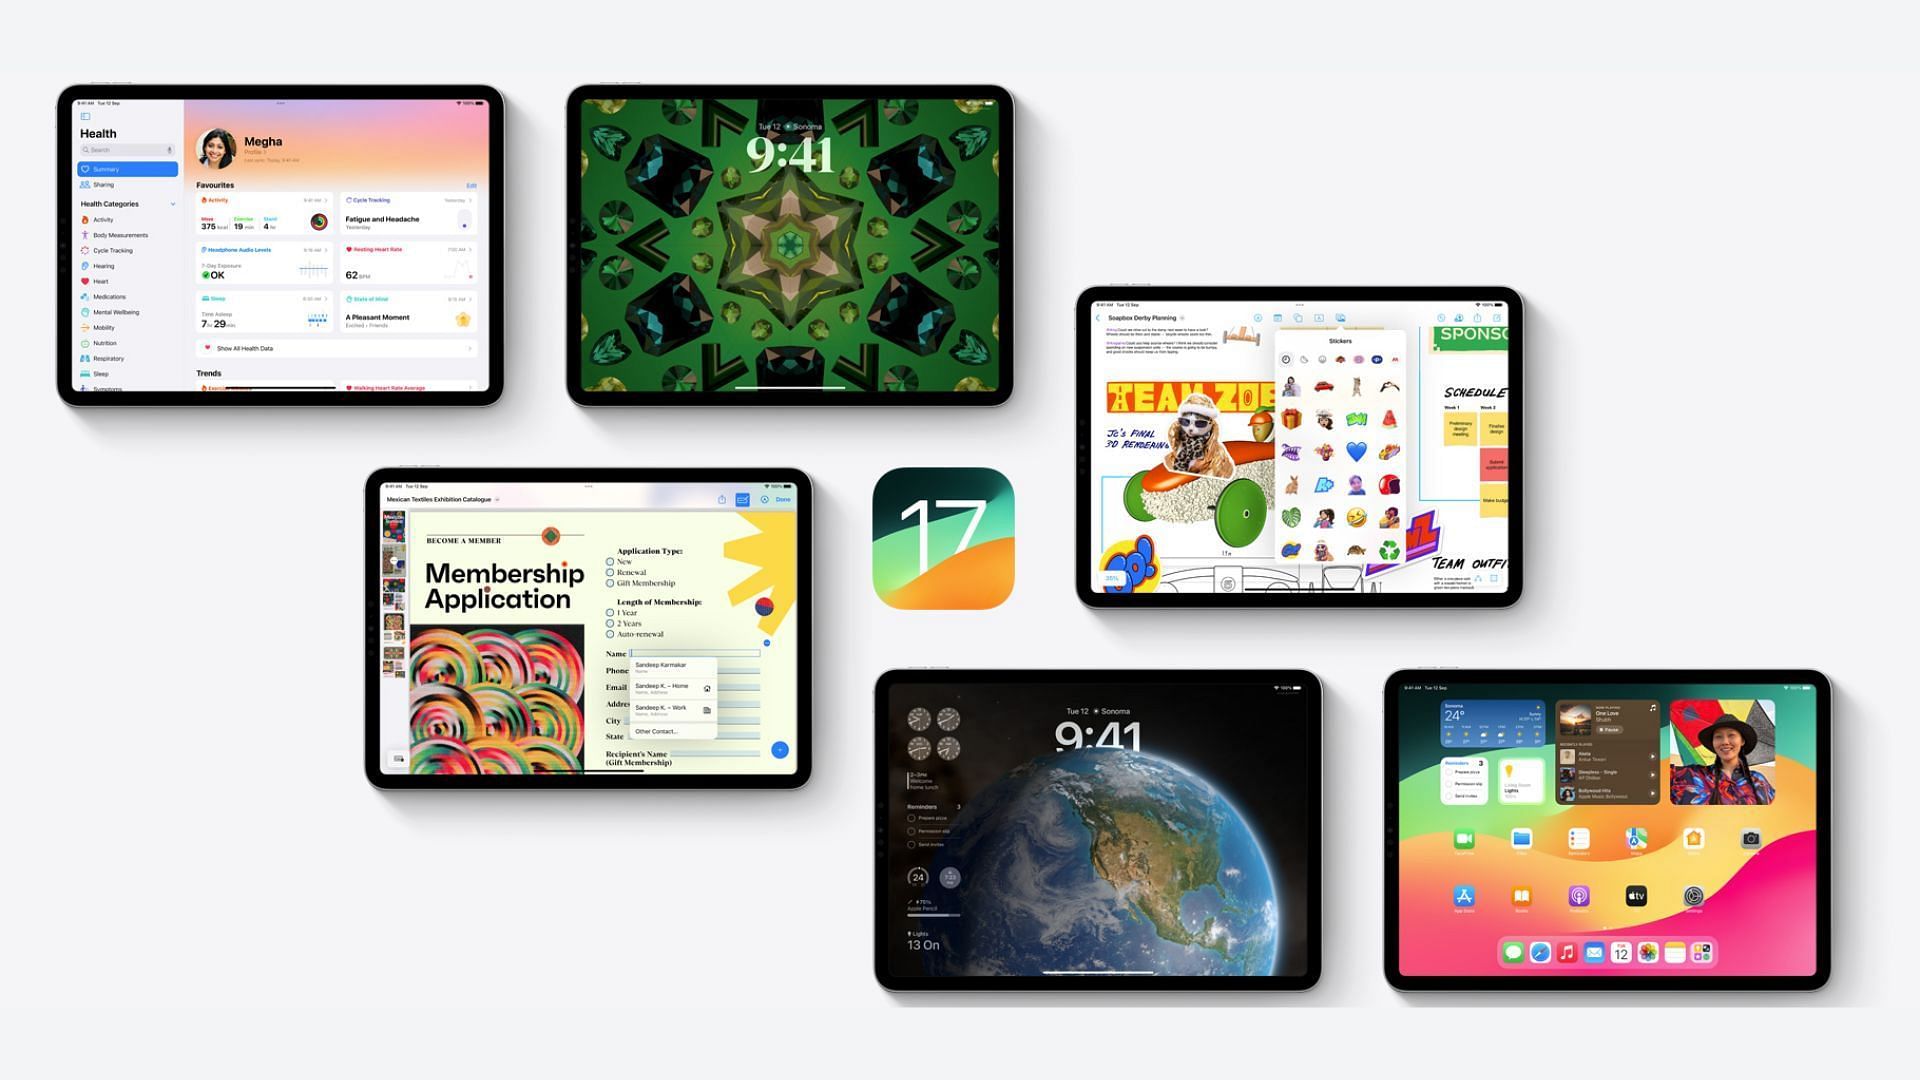 iPadOS offers better optimization for gaming than Android (Image via Apple)